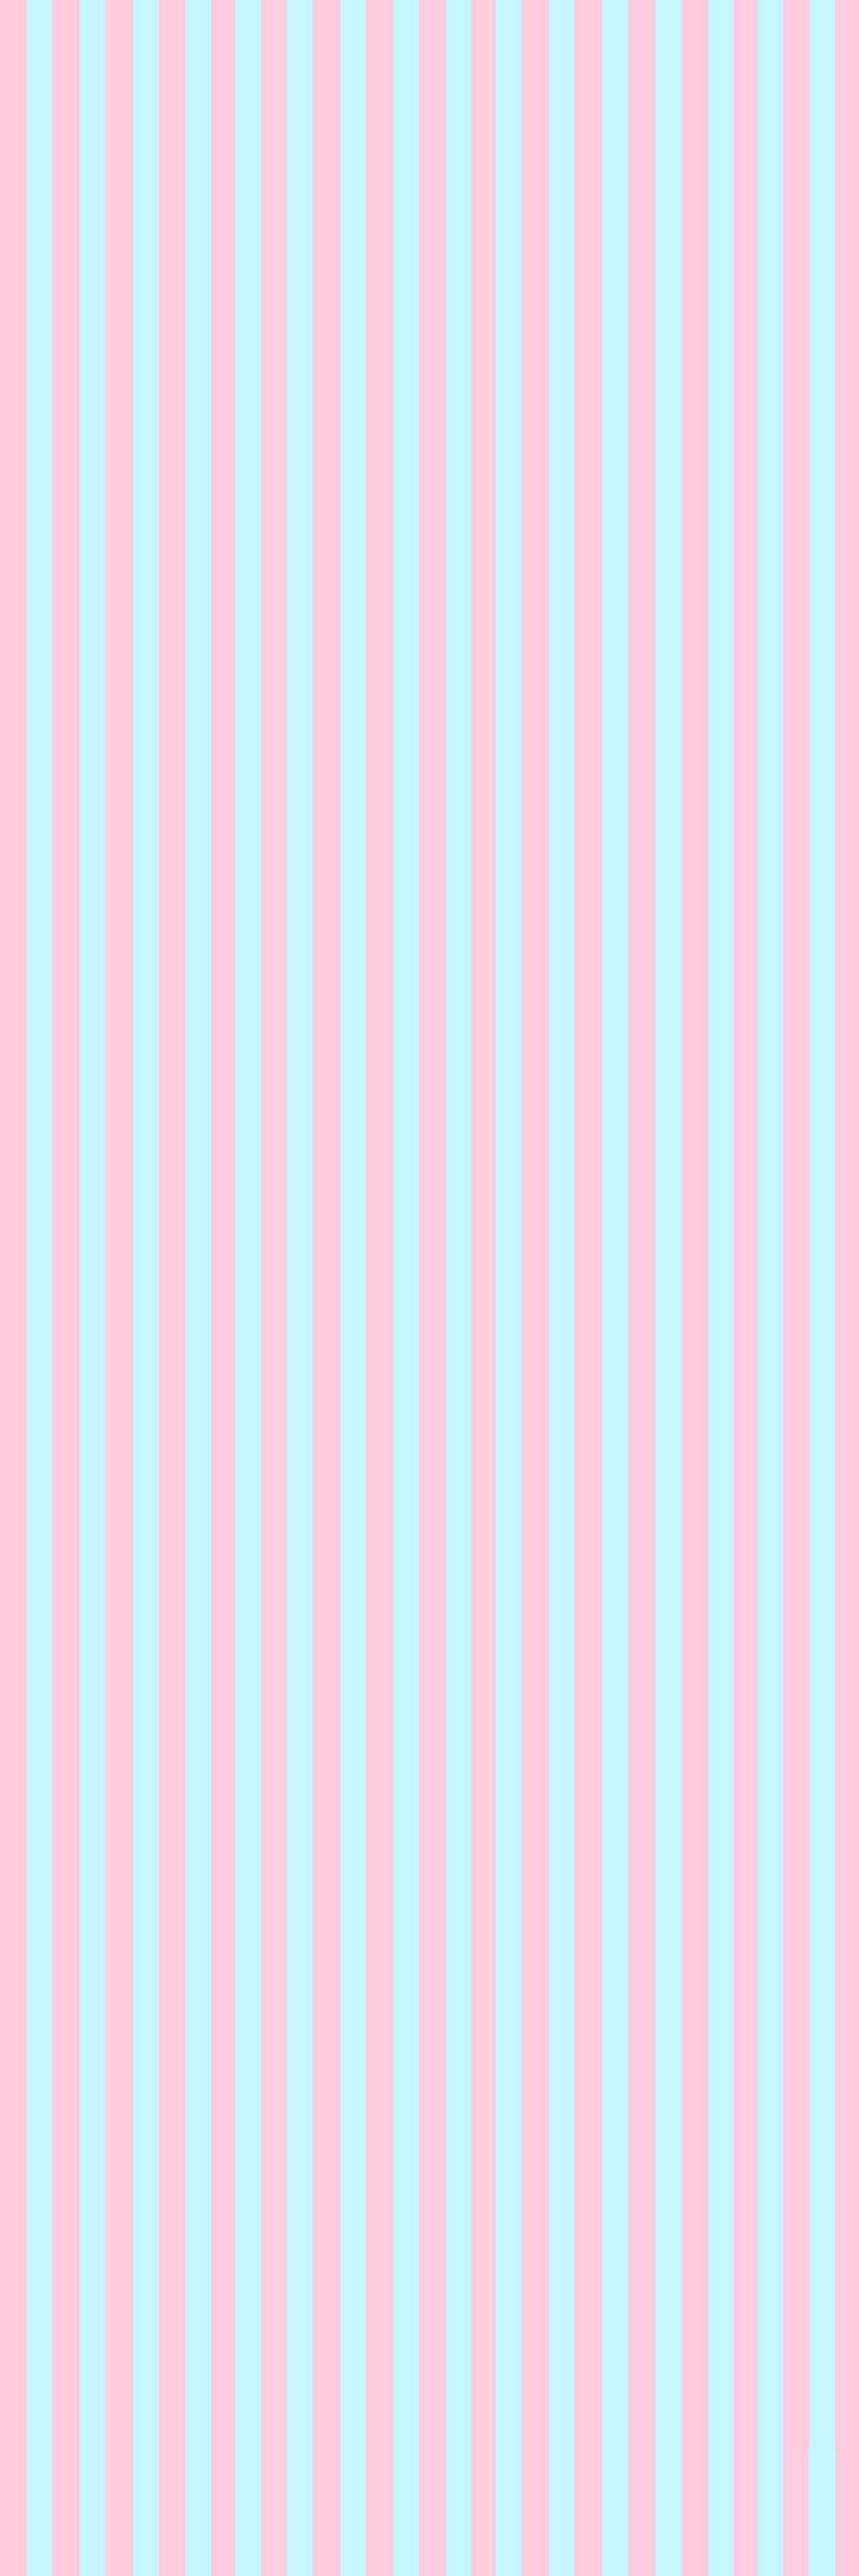 Blue And Pink Striped Wallpaper Image Pictures Becuo